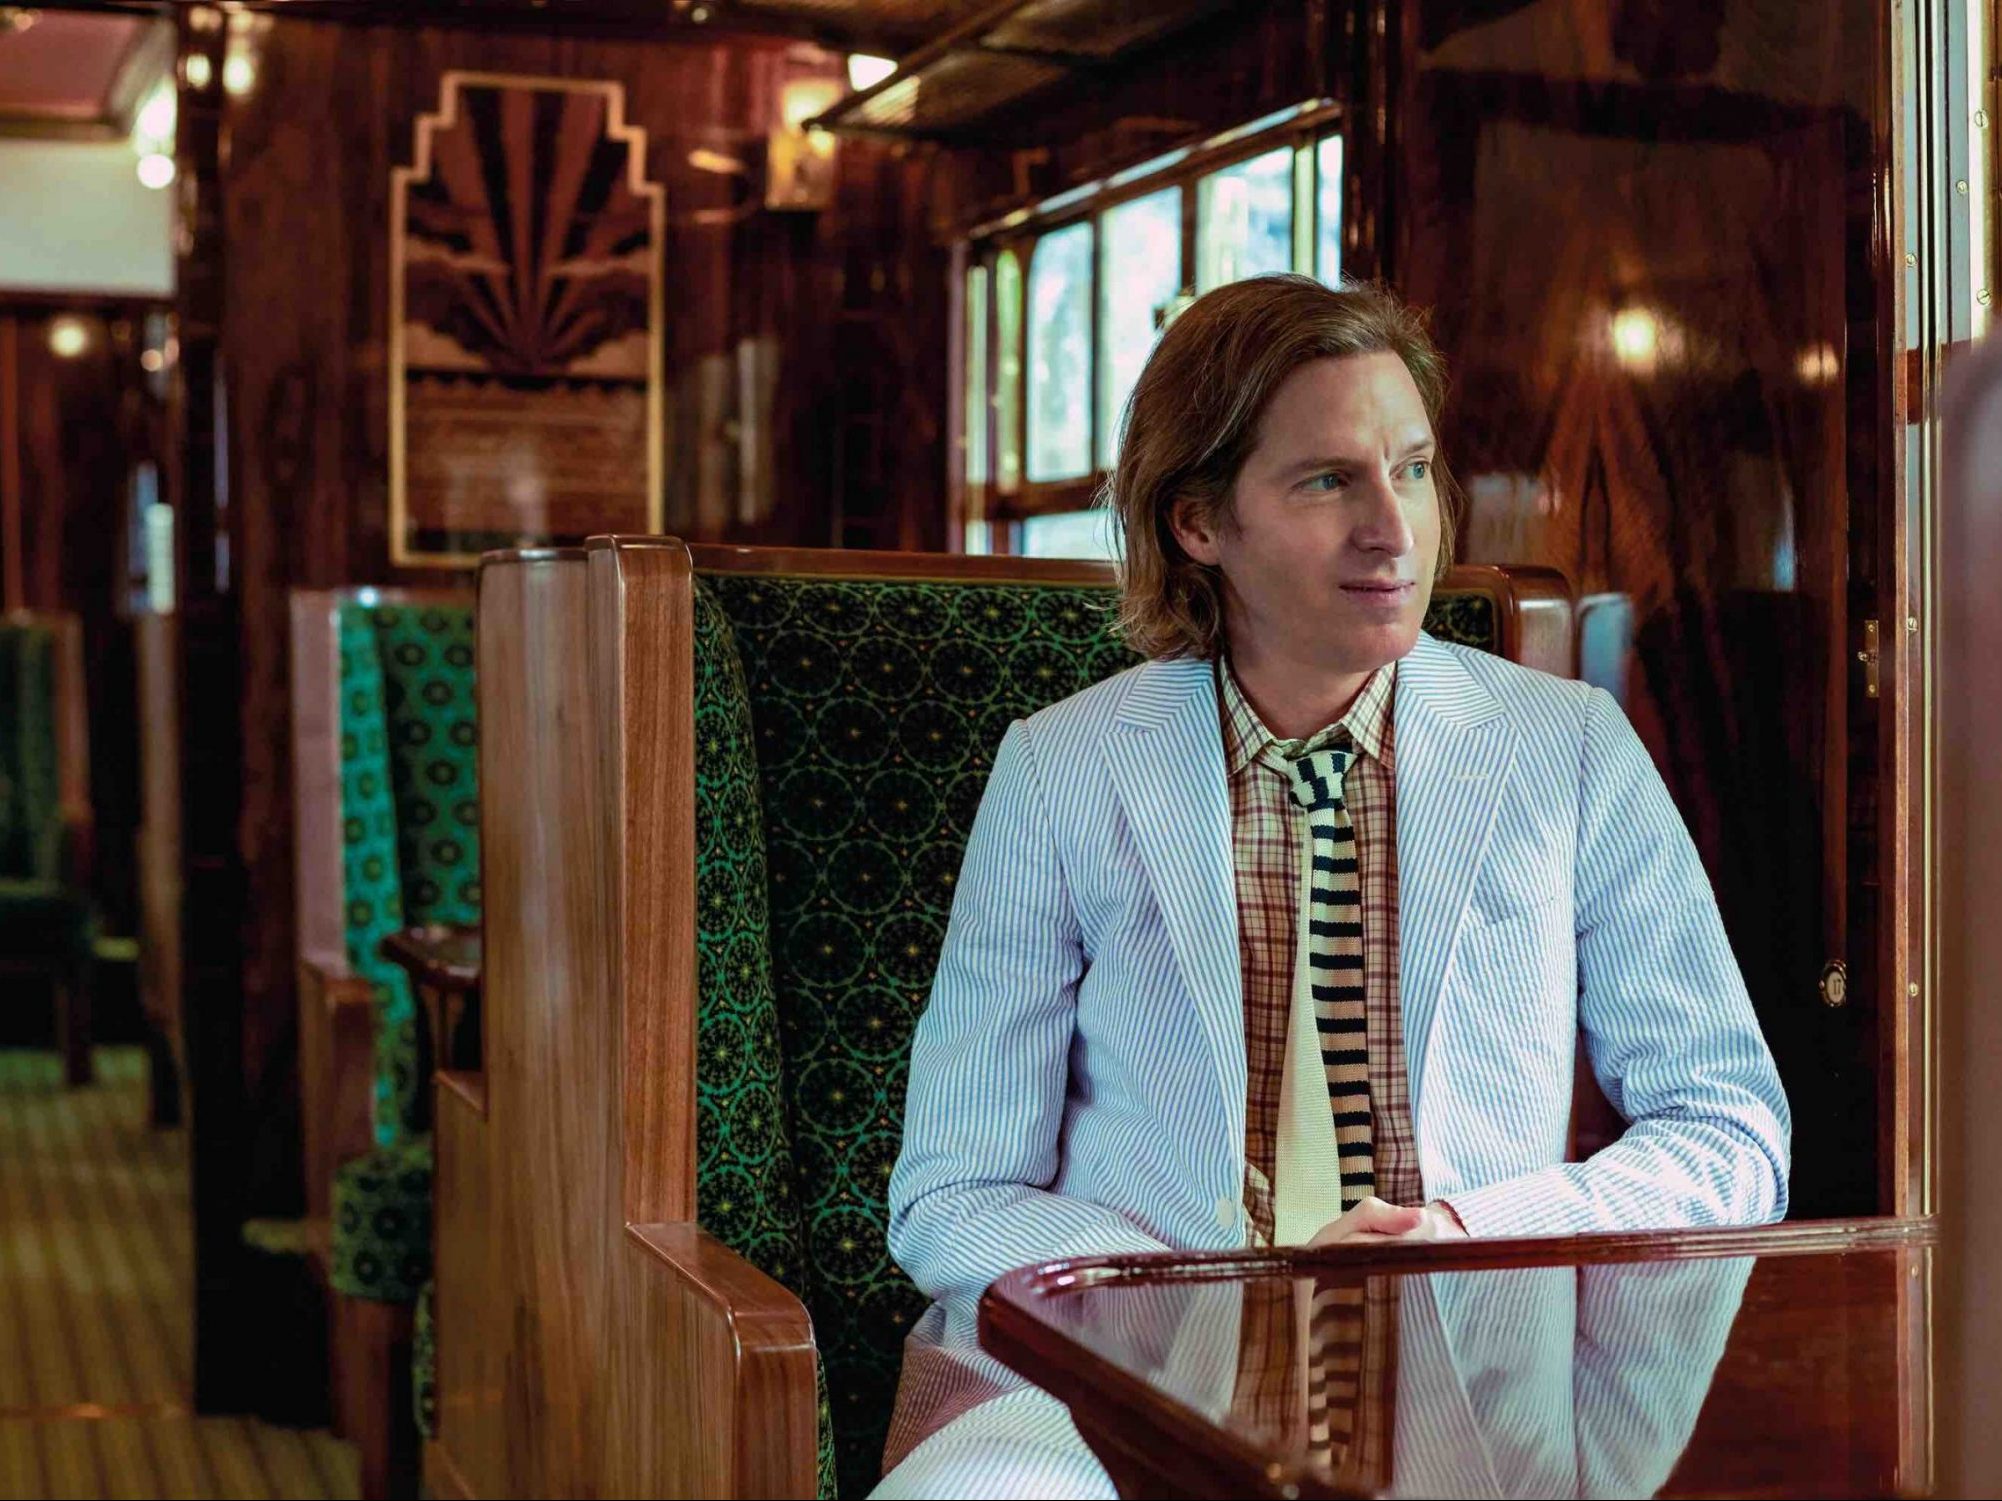 Wes Anderson’s new film Asteroid City will hit Earth in